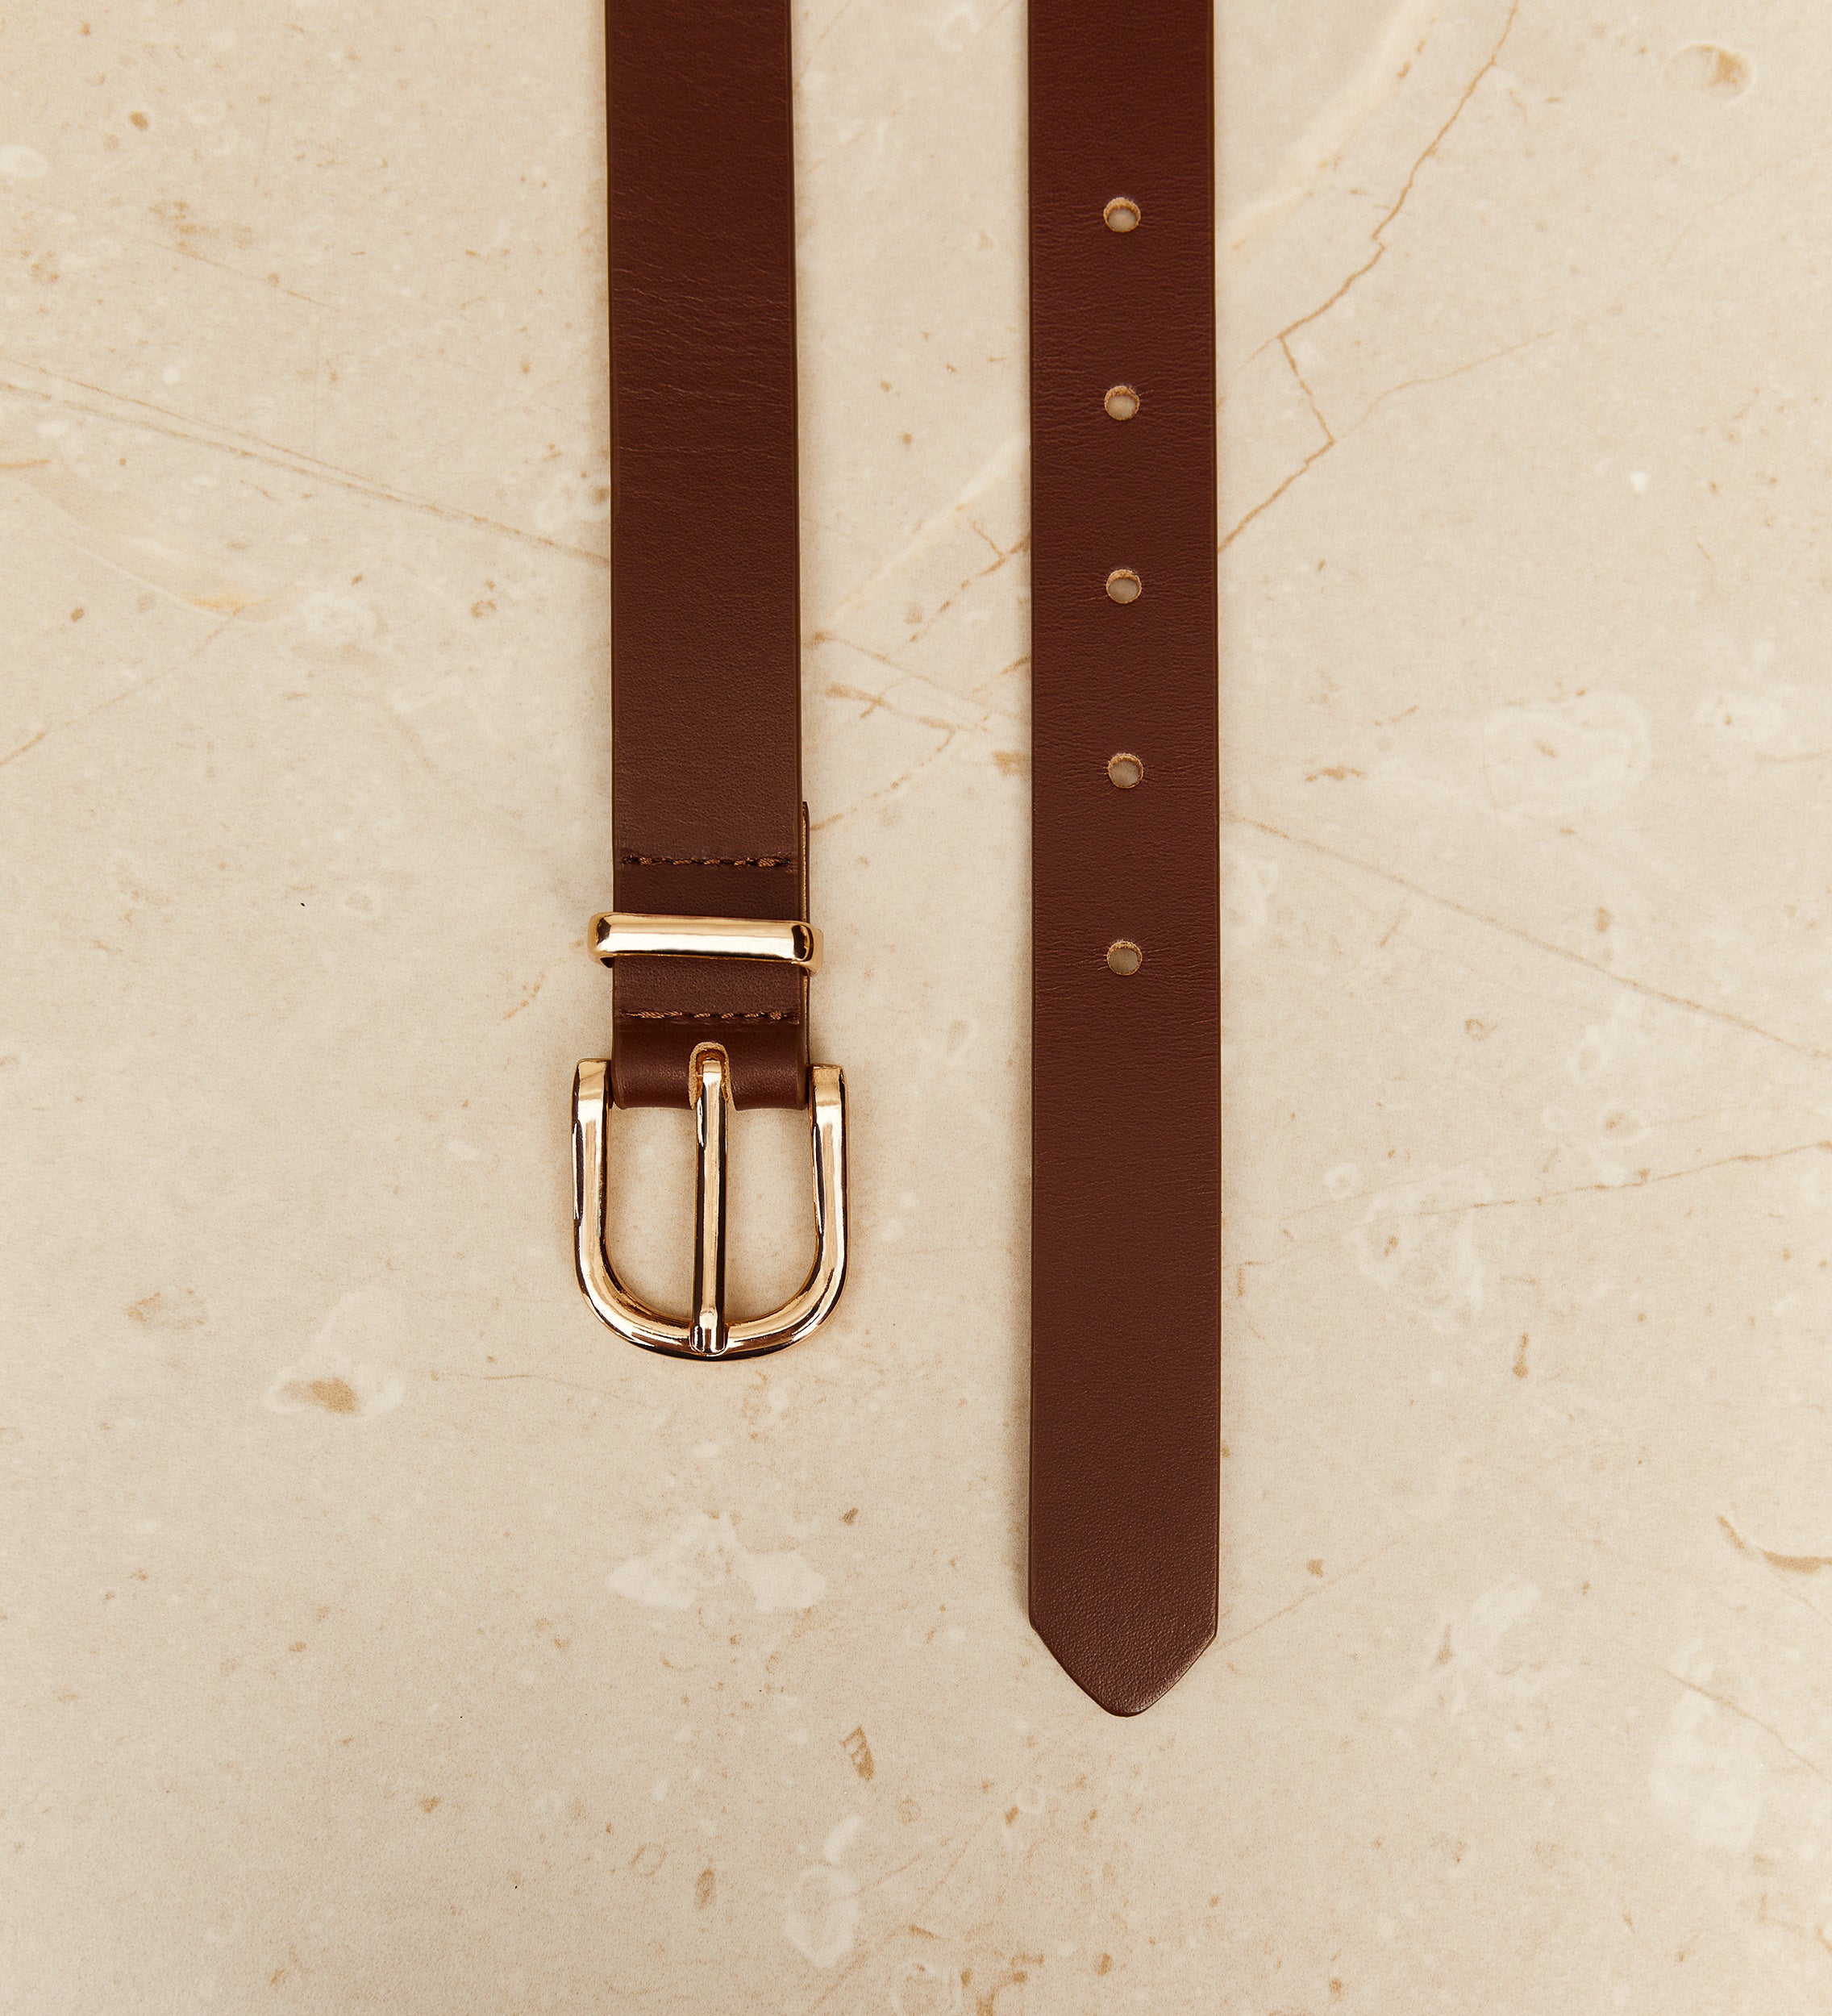 Leather belt with metal buckle